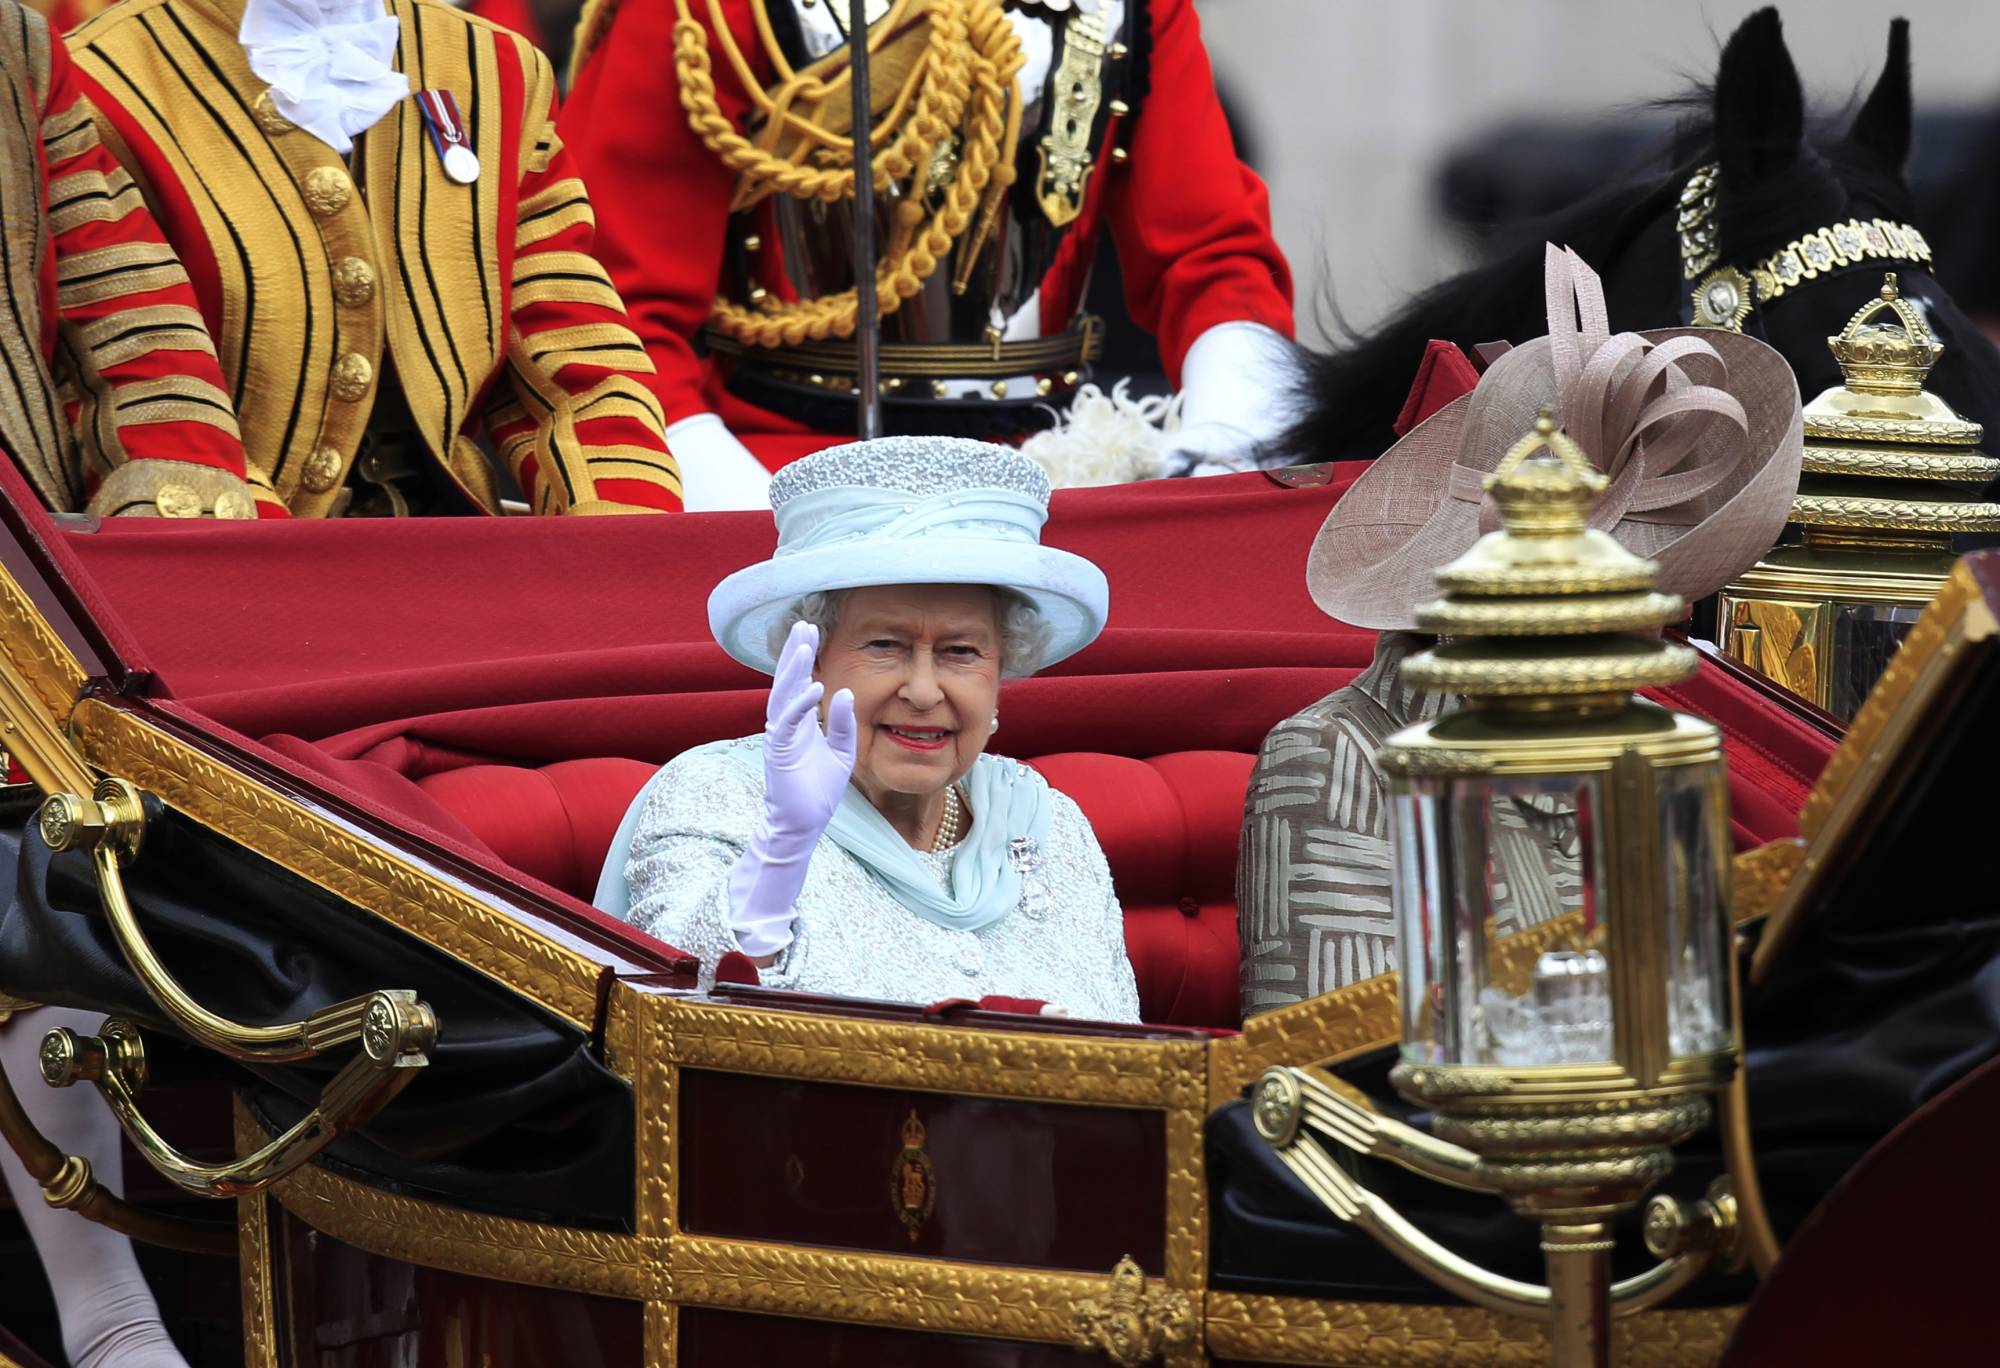 Britain's Queen Elizabeth II leads a carriage procession through London en route to Buckingham Palace during her Diamond Jubilee in June 2012. | REUTERS